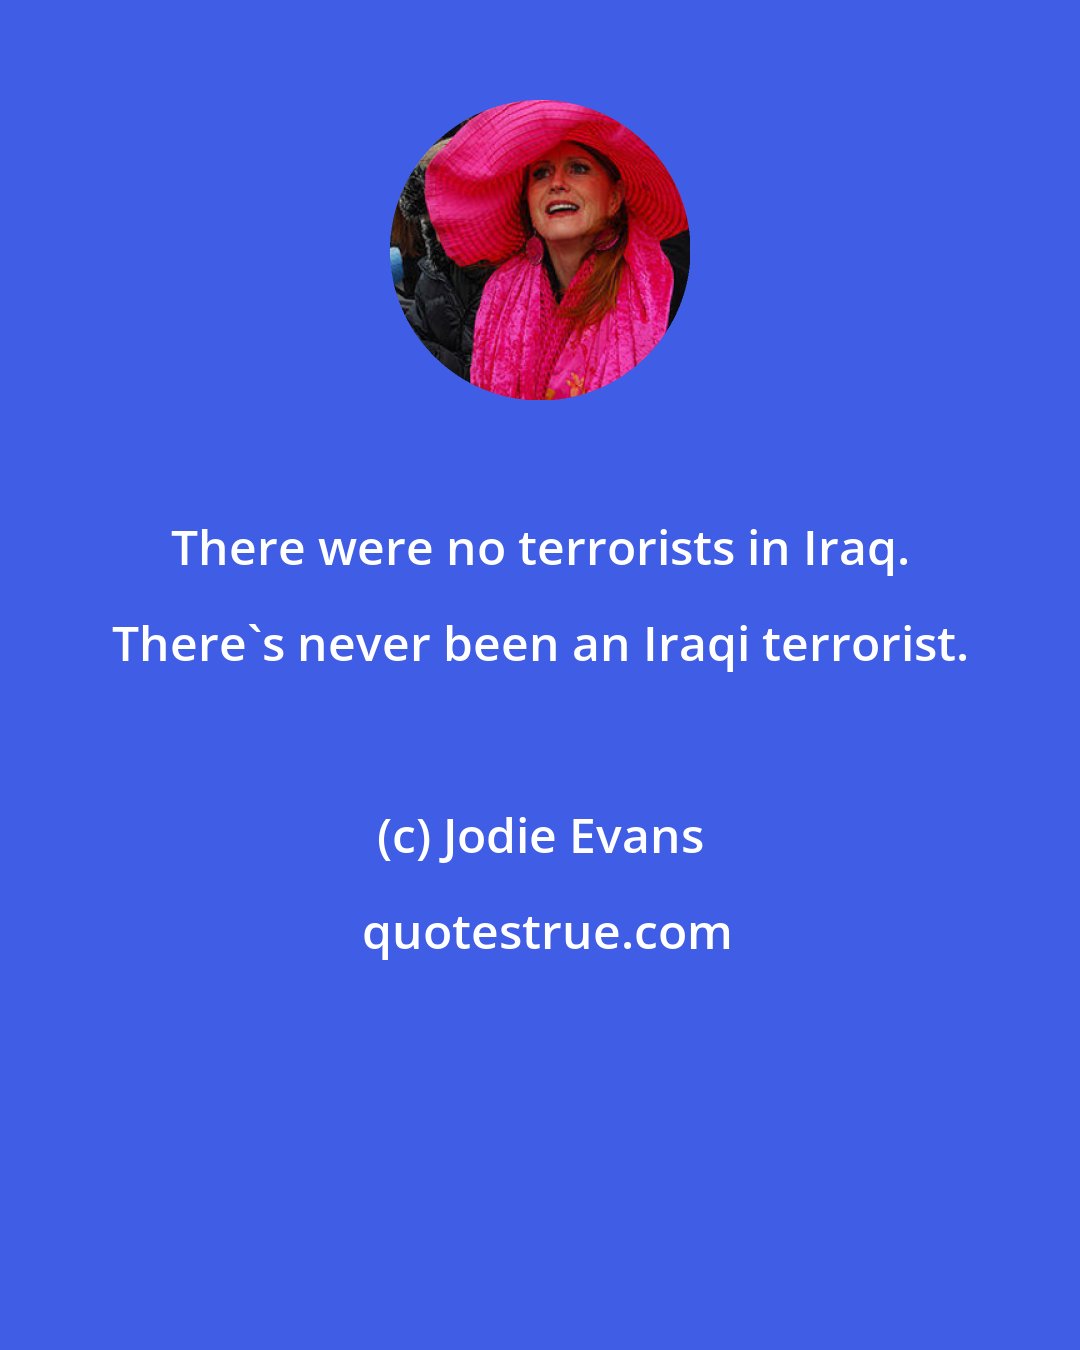 Jodie Evans: There were no terrorists in Iraq. There's never been an Iraqi terrorist.